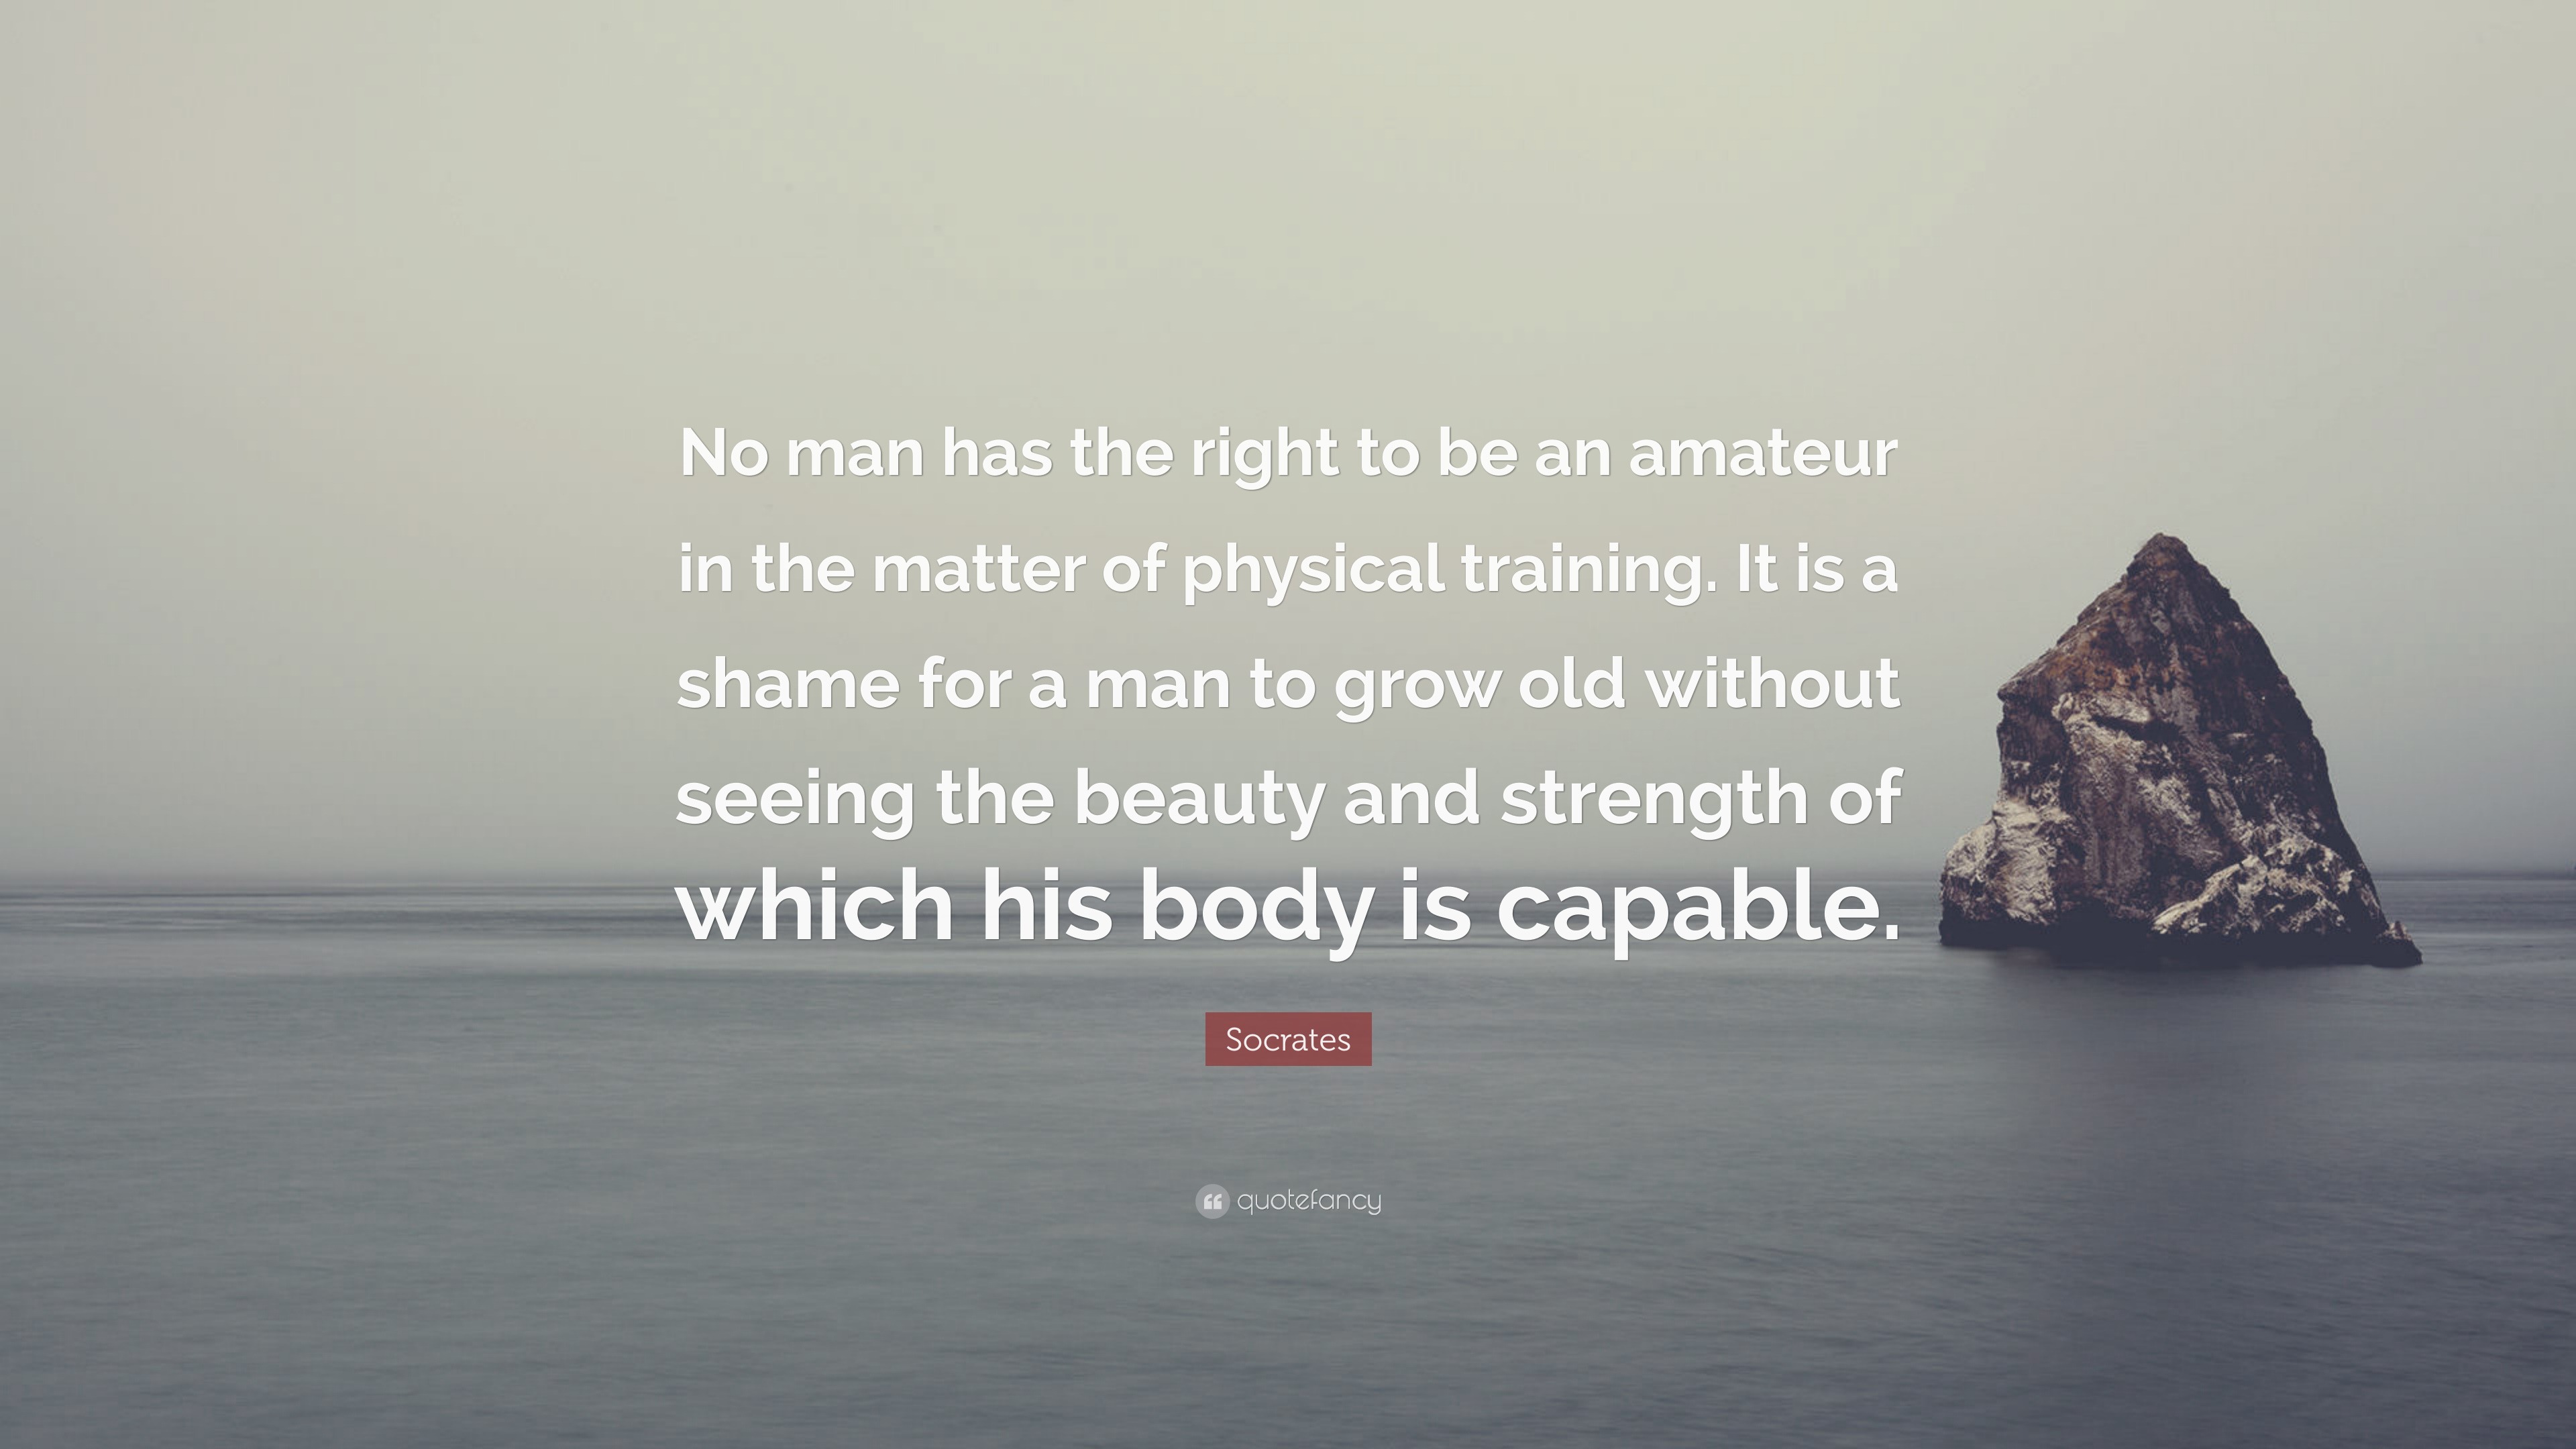 Socrates Quote: “No man has the right to be an amateur in the matter of